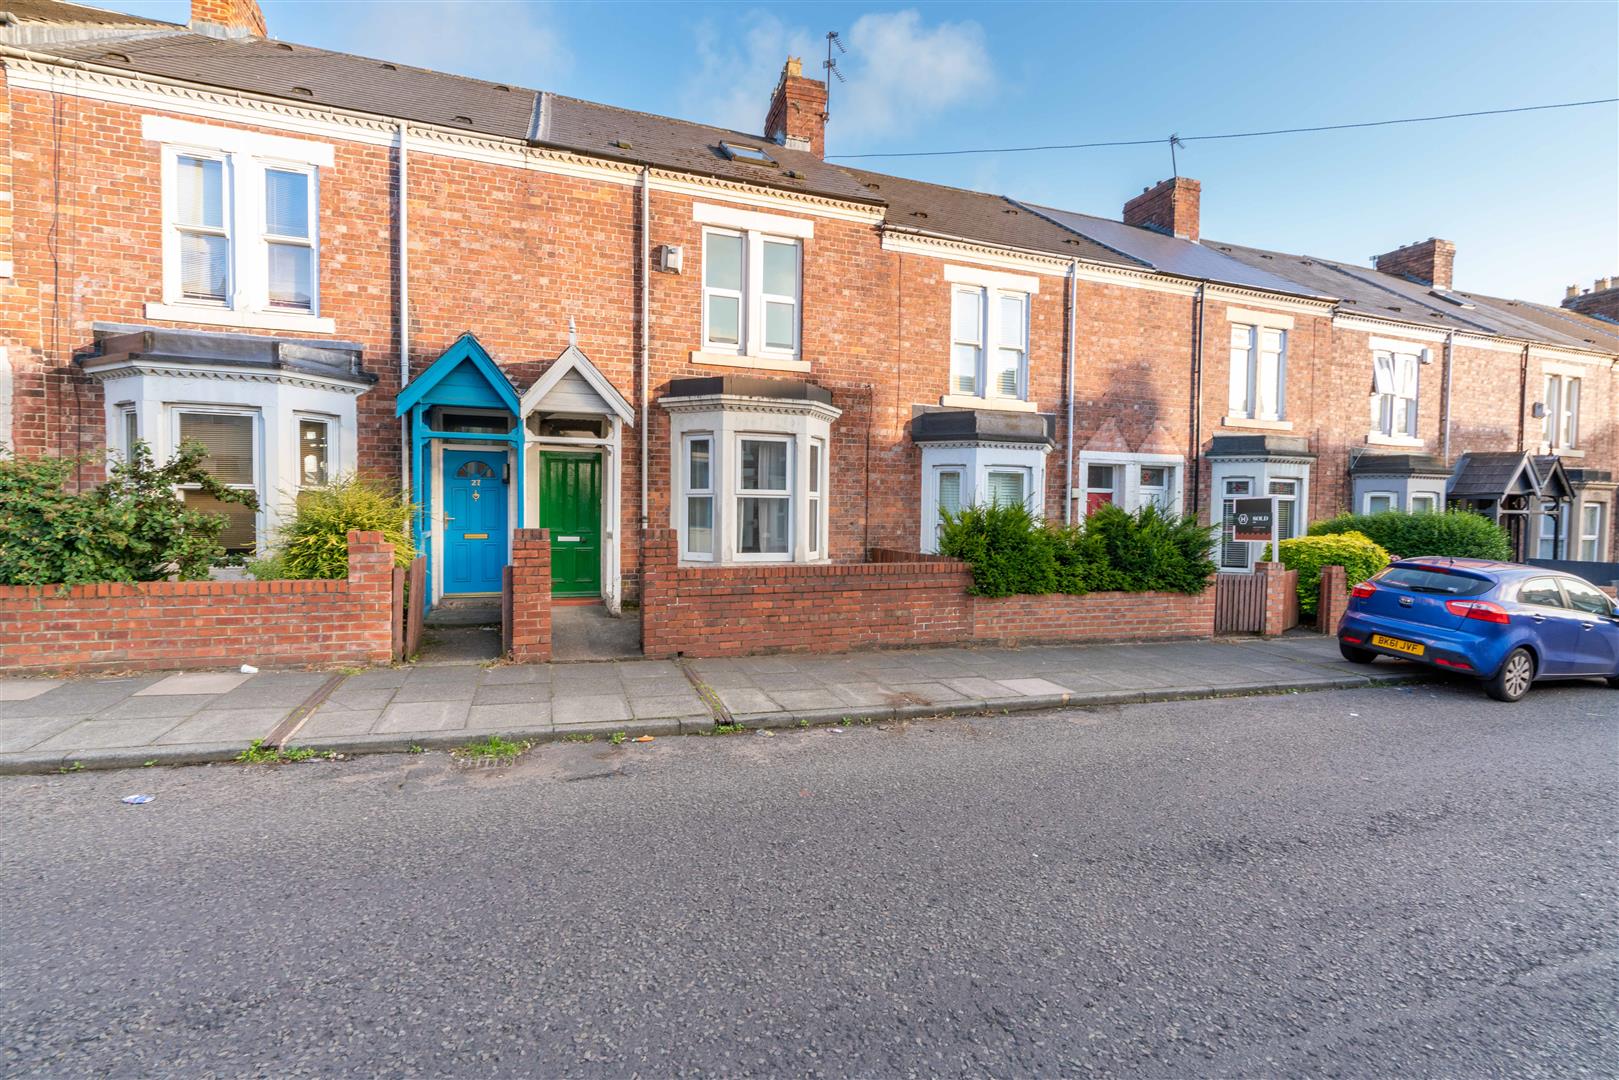 5 bed terraced house for sale in Warwick Street, Heaton  - Property Image 1